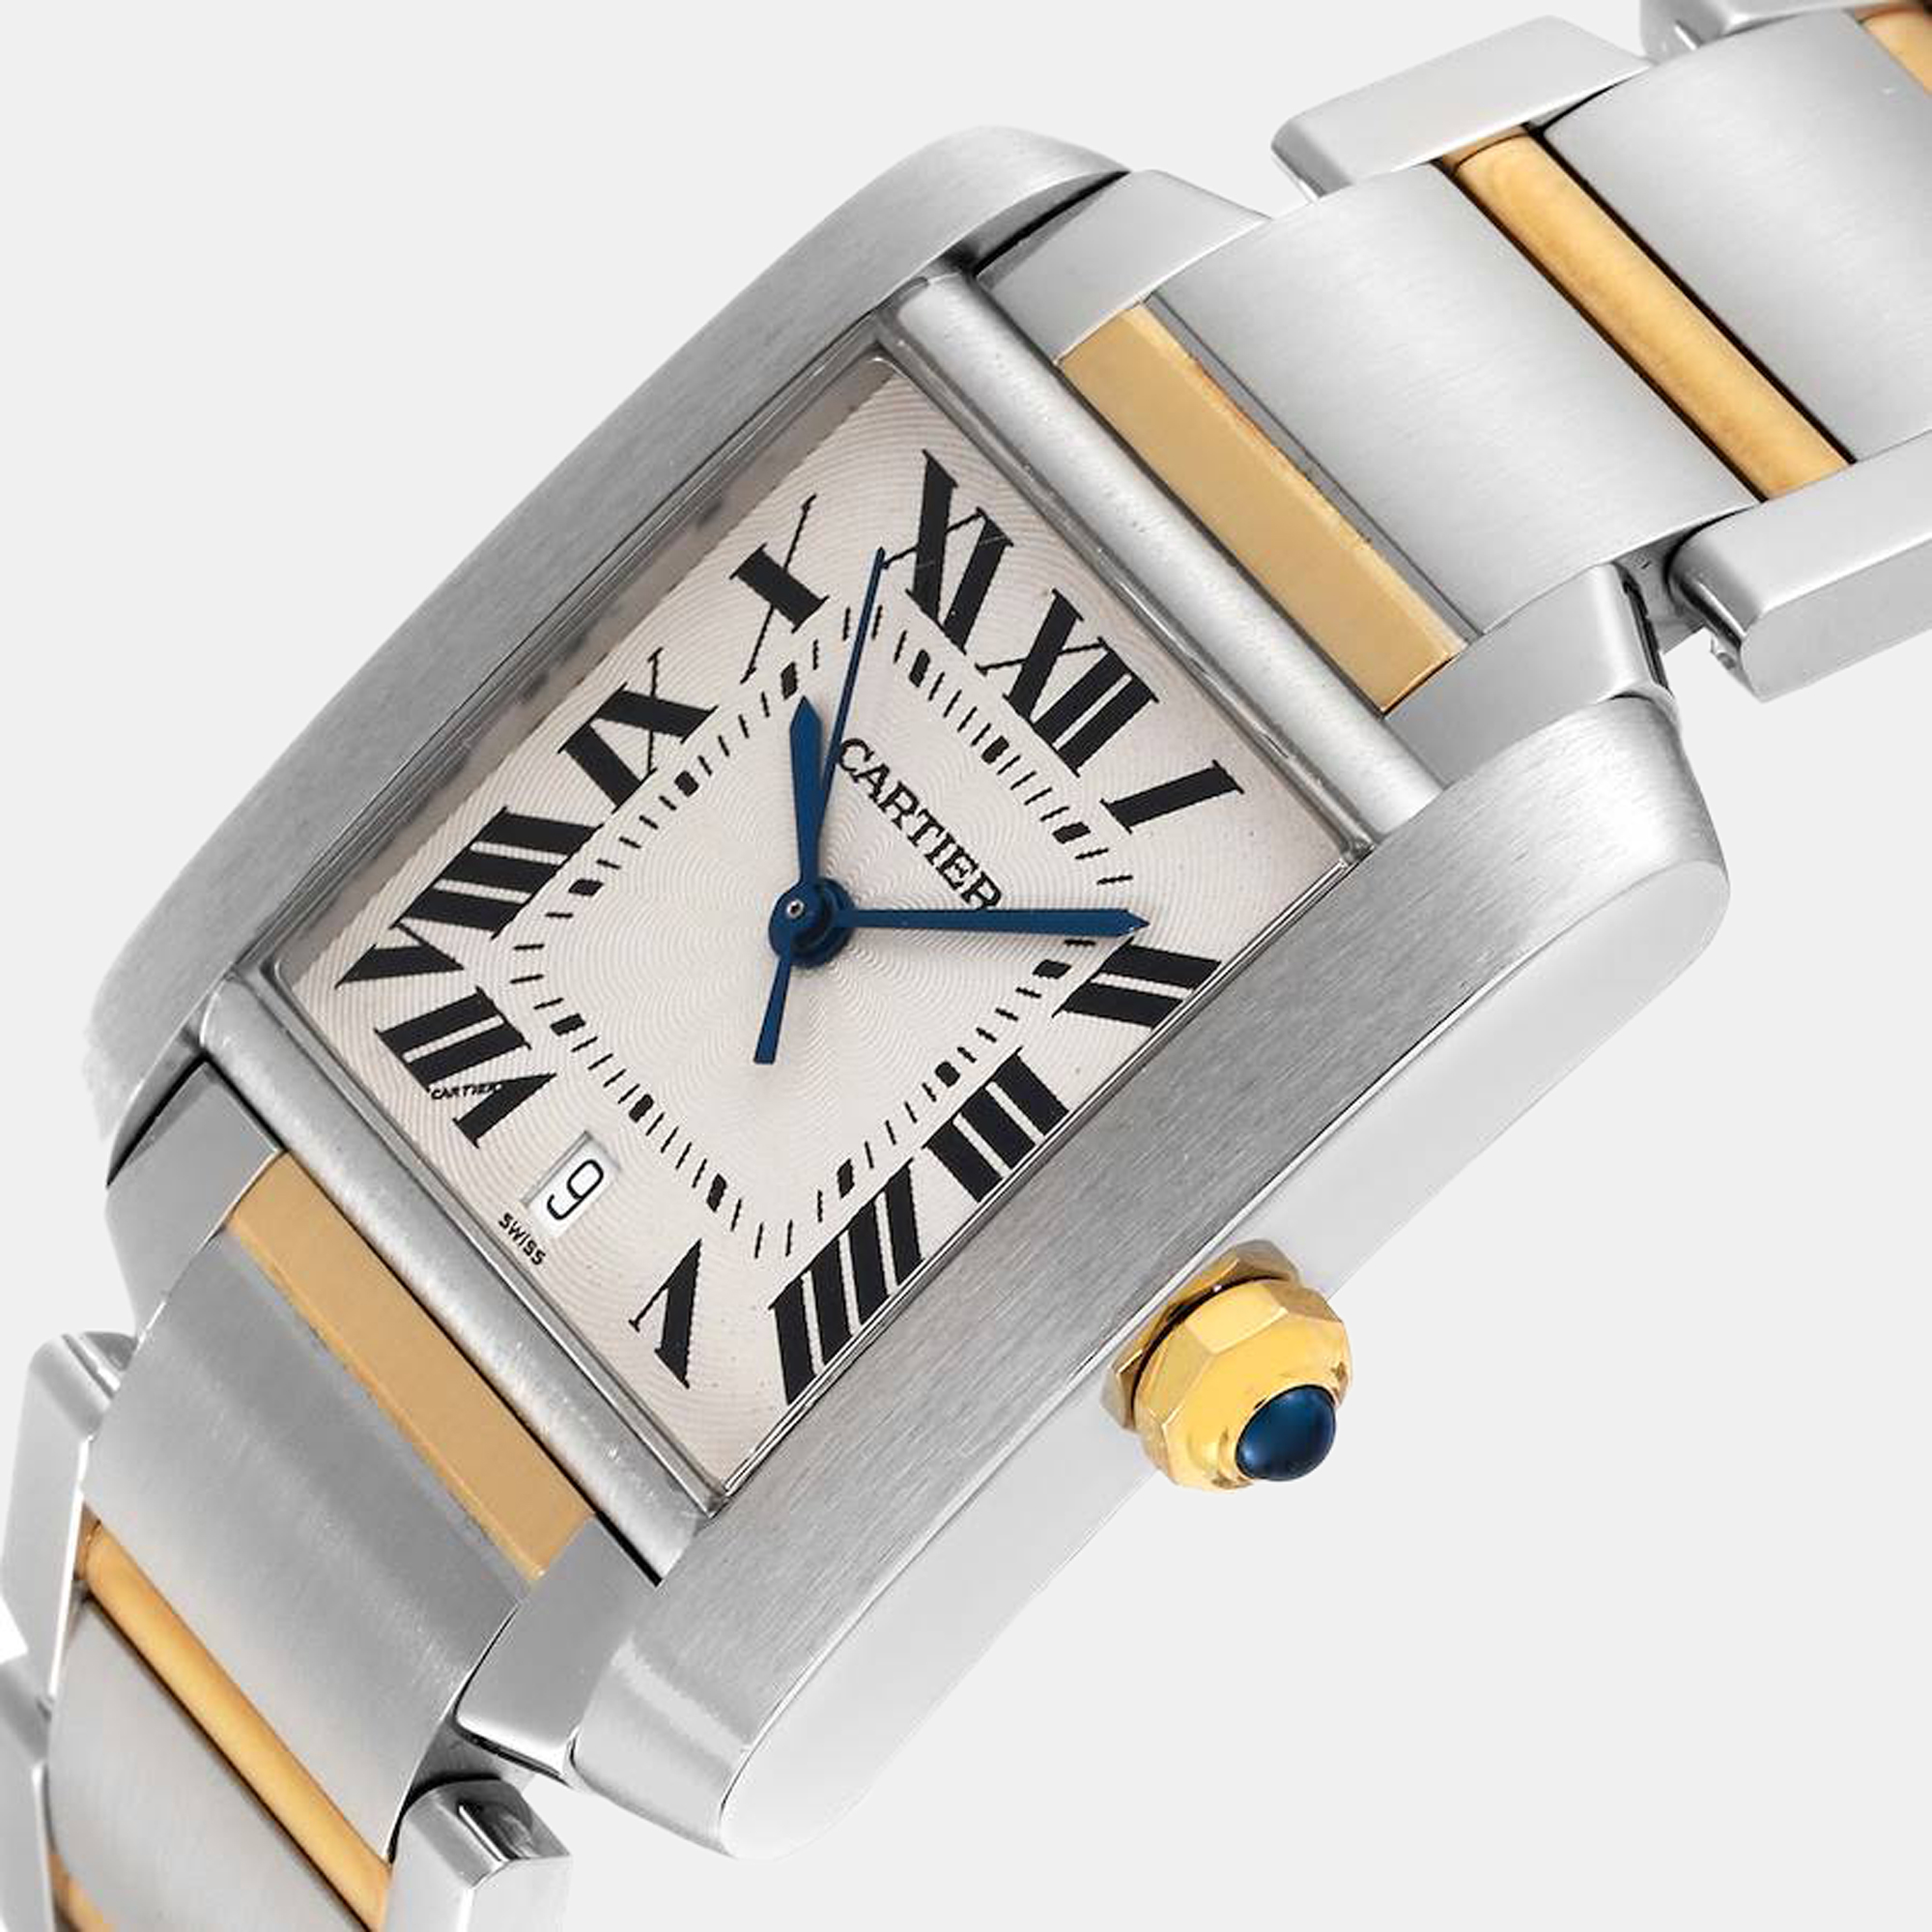 

Cartier Silver 18k Yellow Gold And Stainless Steel Tank Francaise W51005Q4 Automatic Men's Wristwatch 28 mm